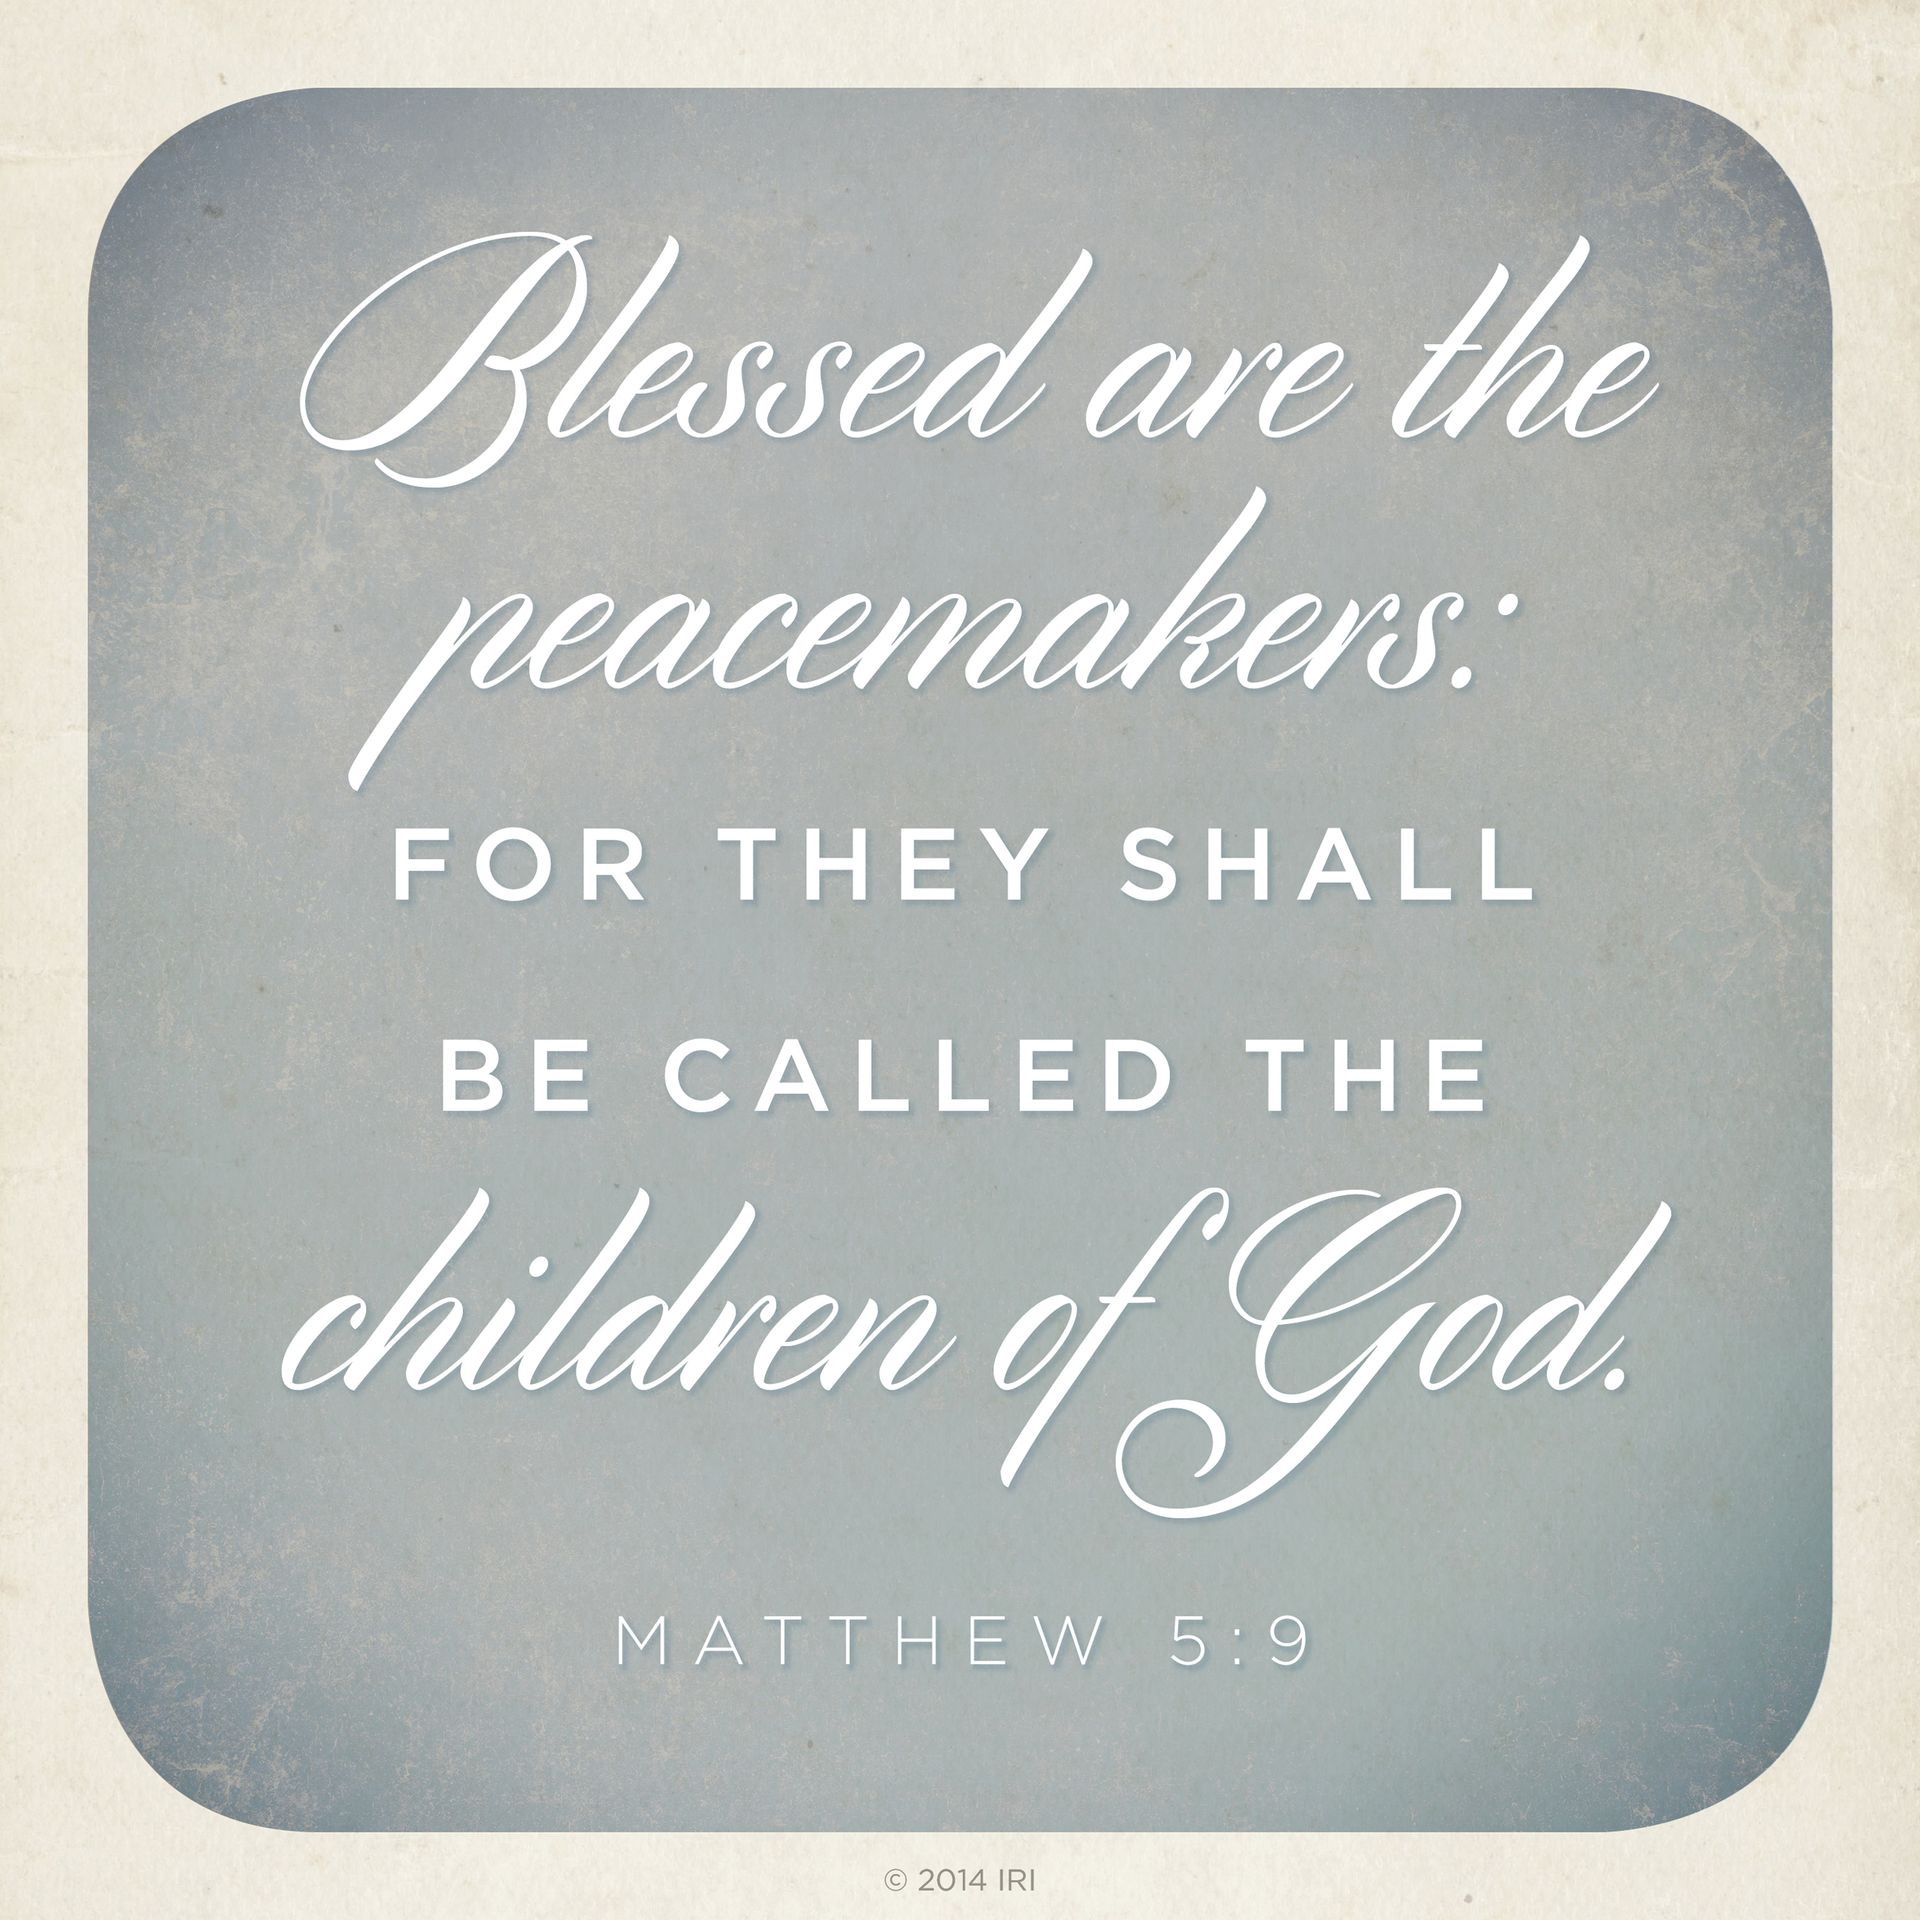 “Blessed are the peacemakers: for they shall be called the children of God.”—Matthew 5:9